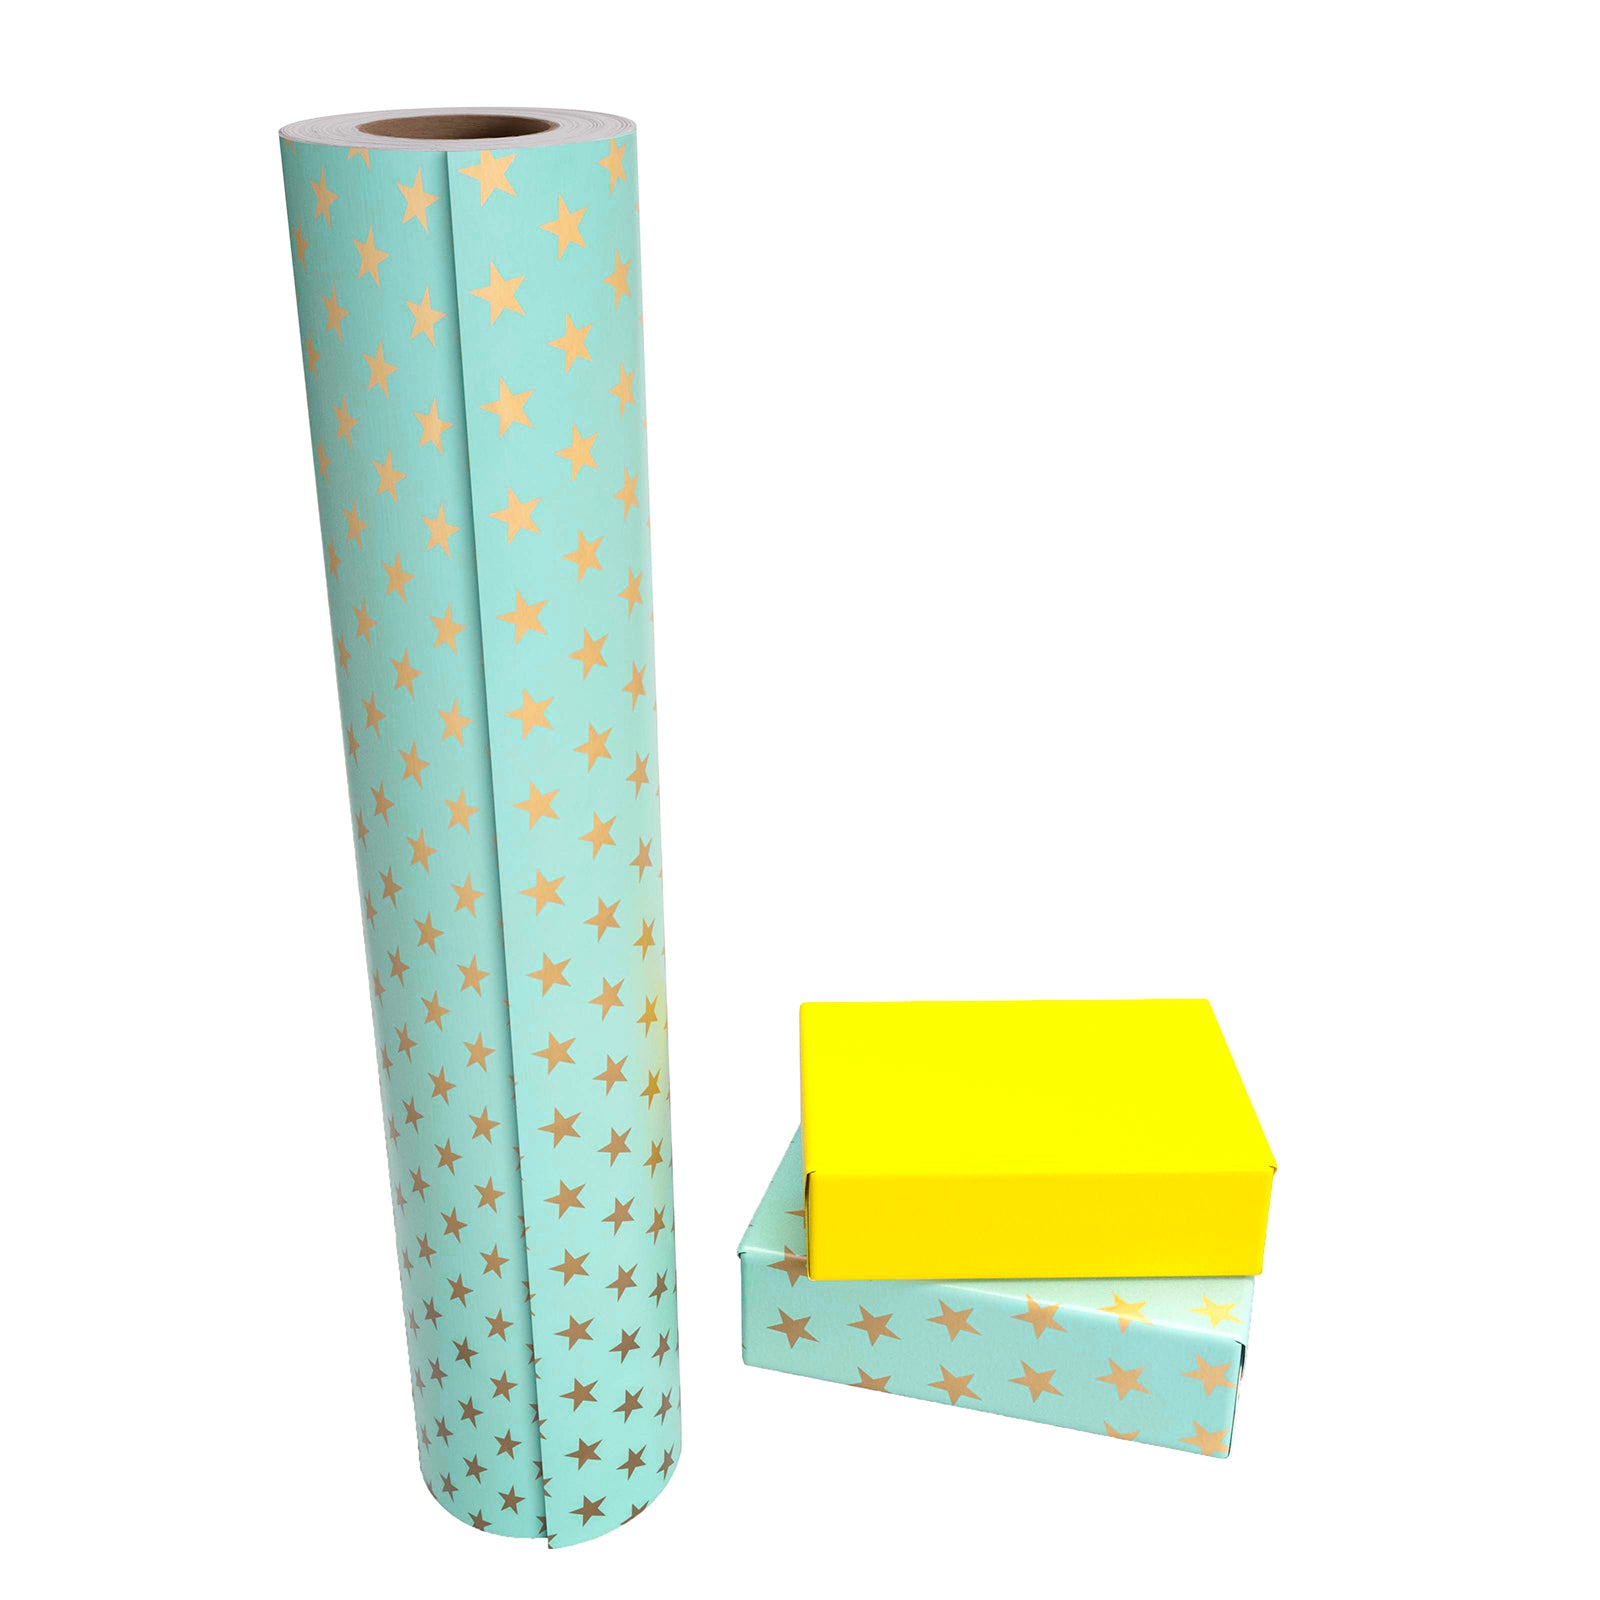 Stars Mint Boy's Birthday Wrapping Paper wtih Yellow Color Packing Paper Supply Wrapaholic